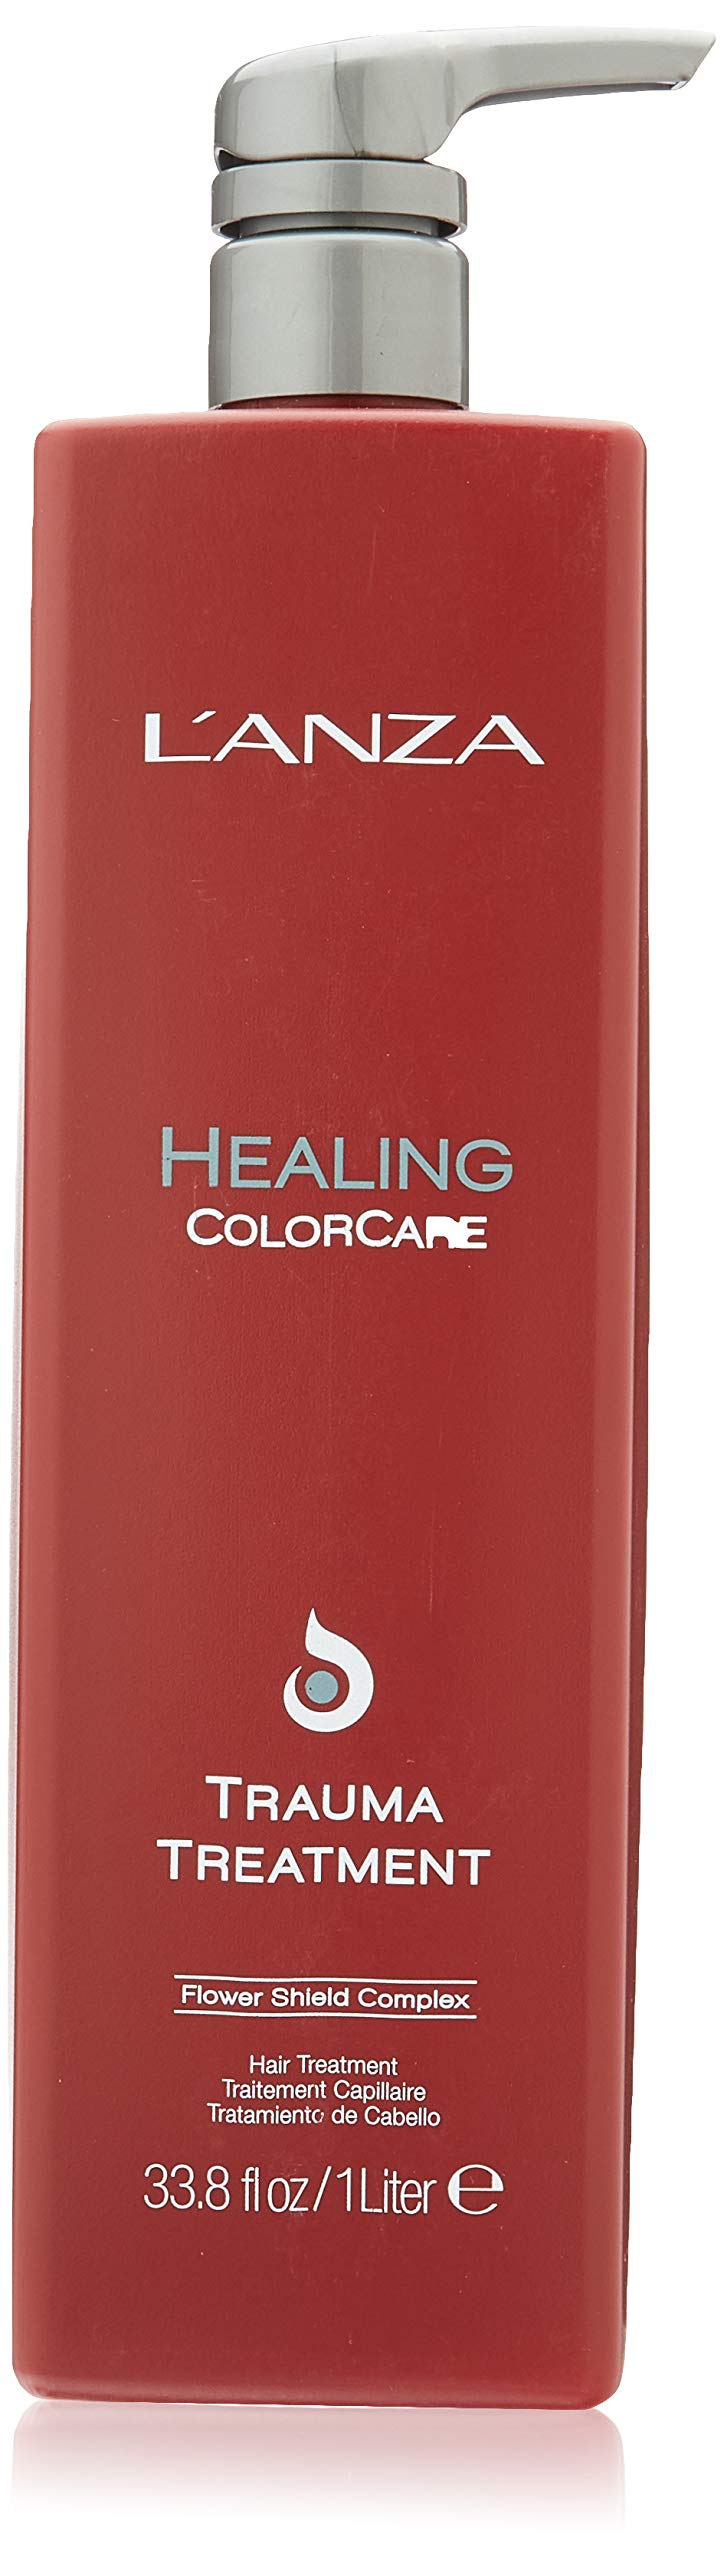 L'ANZA Healing ColorCare Color Preserving Trauma Hair Treatment for Dry Damaged Hair, Eliminates Frizz, and Adds Shine while Sty